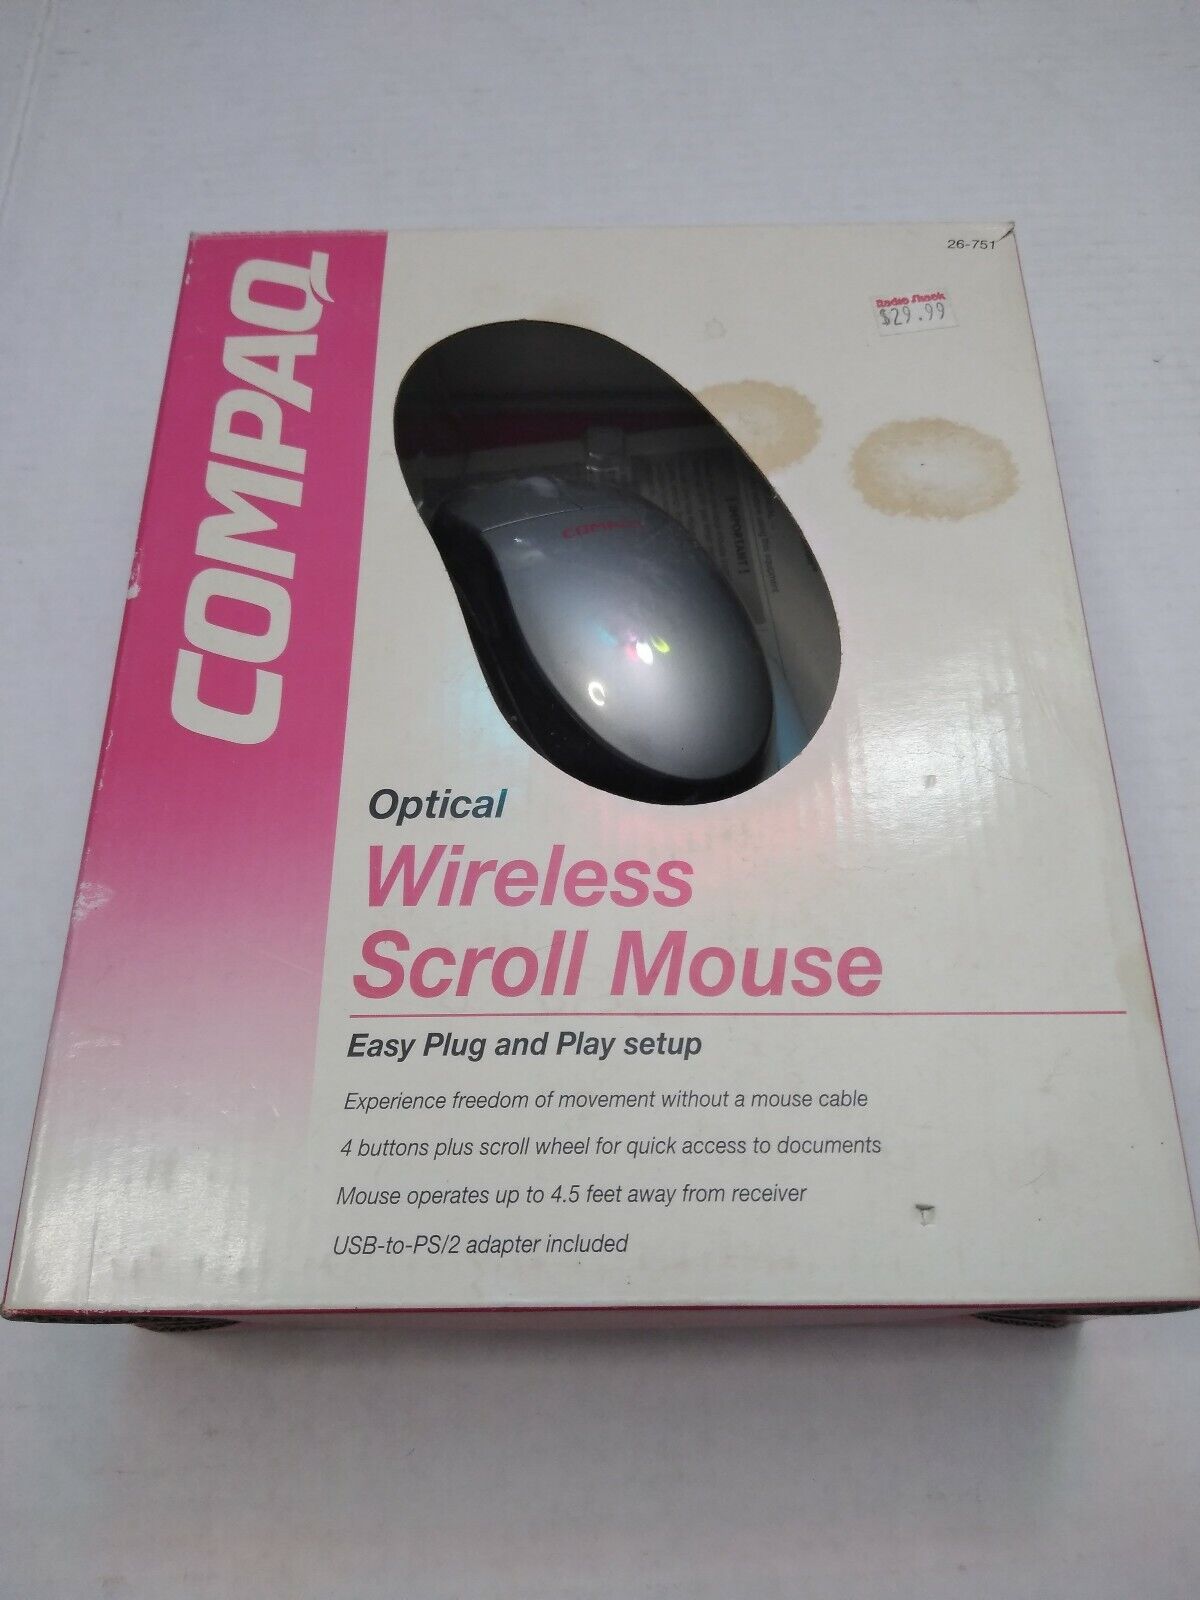 VINTAGE Compaq Optical Wireless Scroll Mouse OPEN BOX